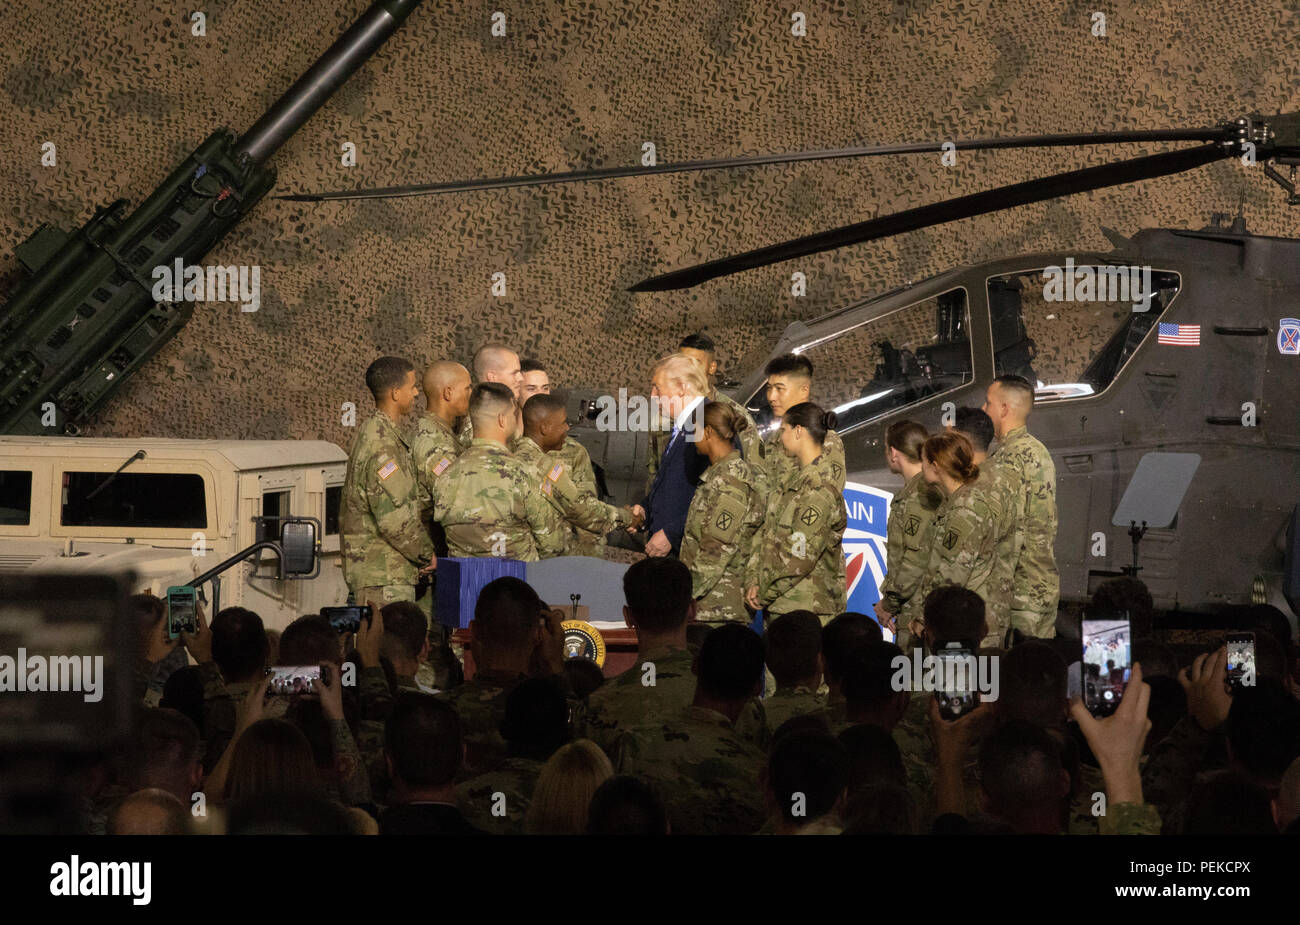 U.S President Donald Trump greets soldiers from the 10th Mountain Division from after signing the John McCain National Defense Authorization Act August 13, 2018 in Fort Drum, New York. Stock Photo